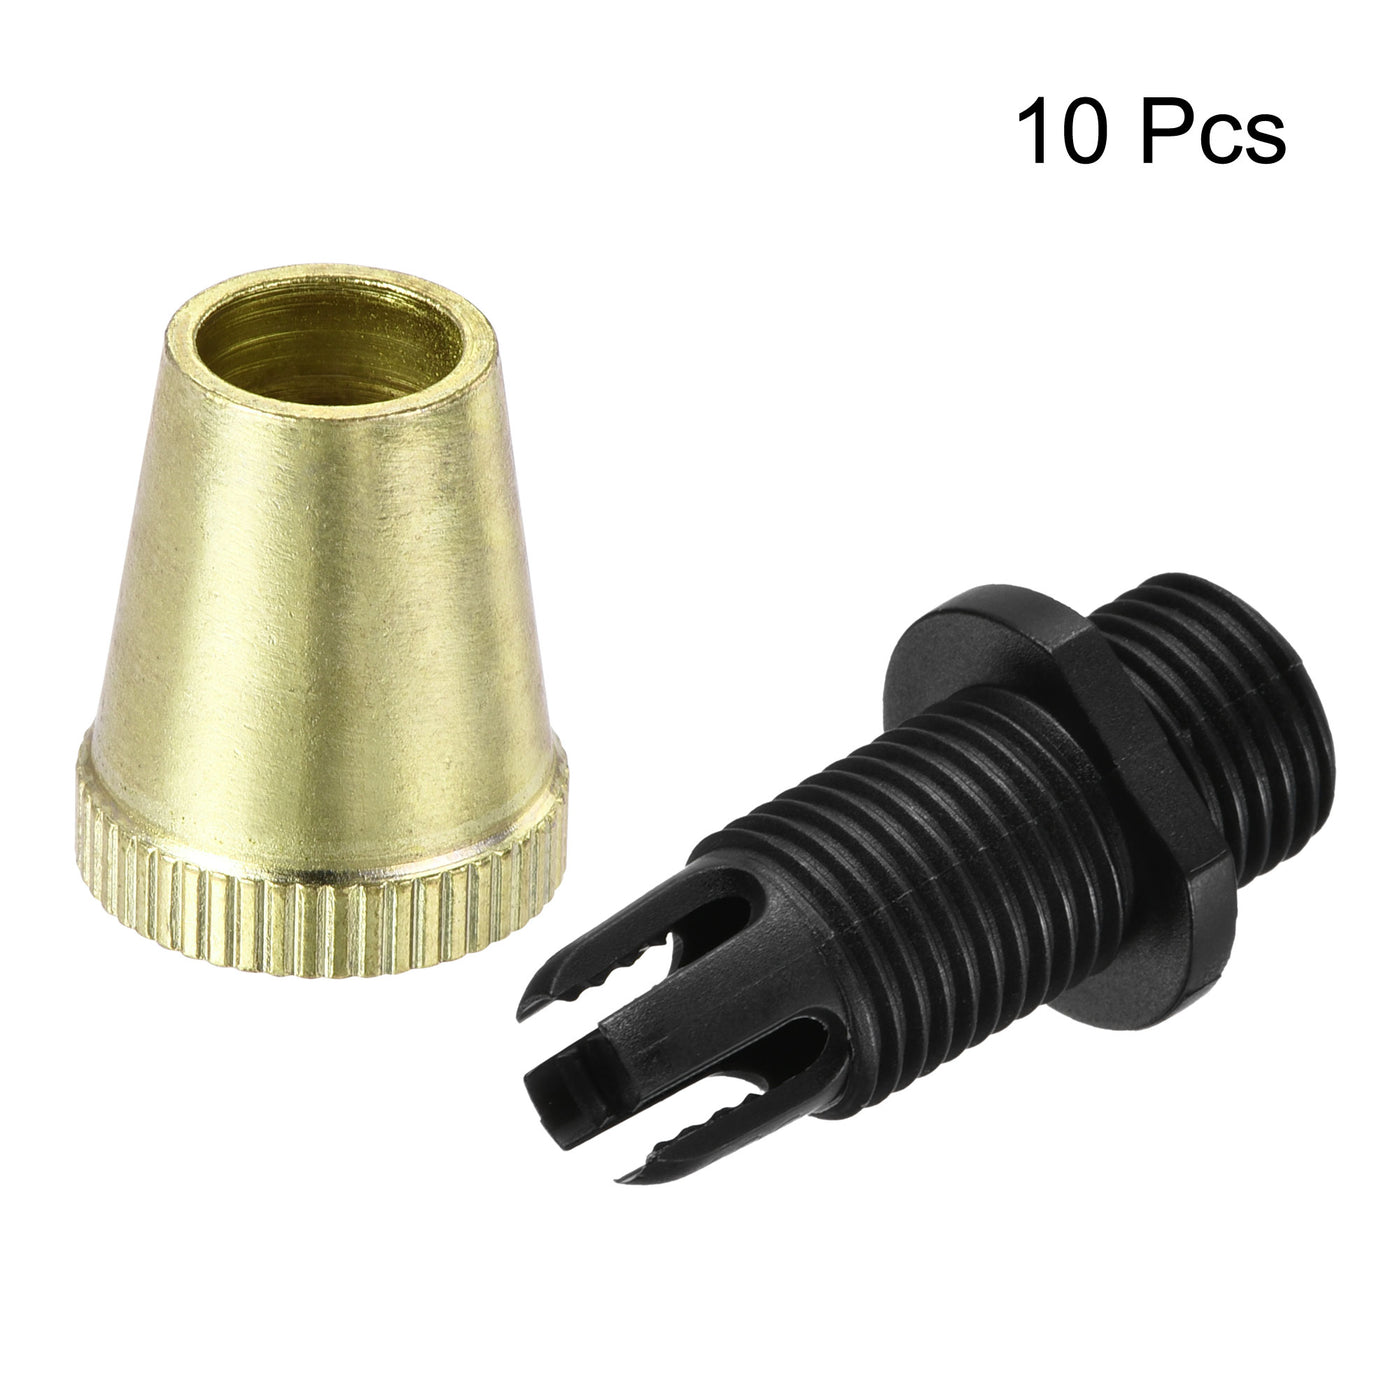 uxcell Uxcell Cable Glands Strain Relief Cord Grips Metal Gold Tone 10Pcs for Wiring Hanging Light Ceiling Pendant Lamp